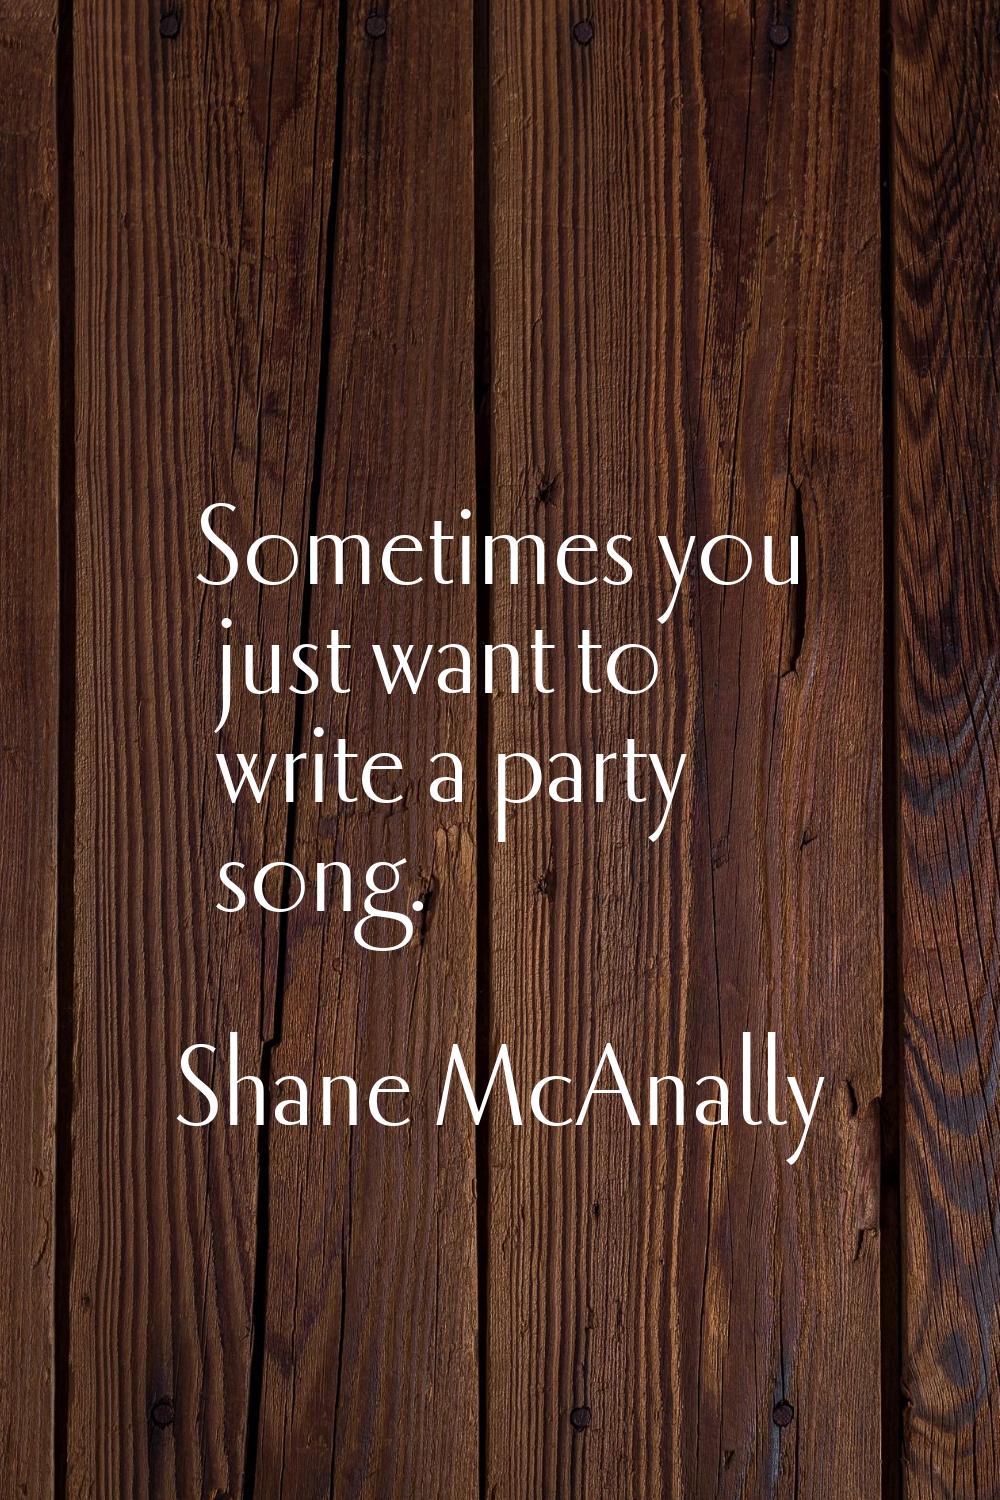 Sometimes you just want to write a party song.